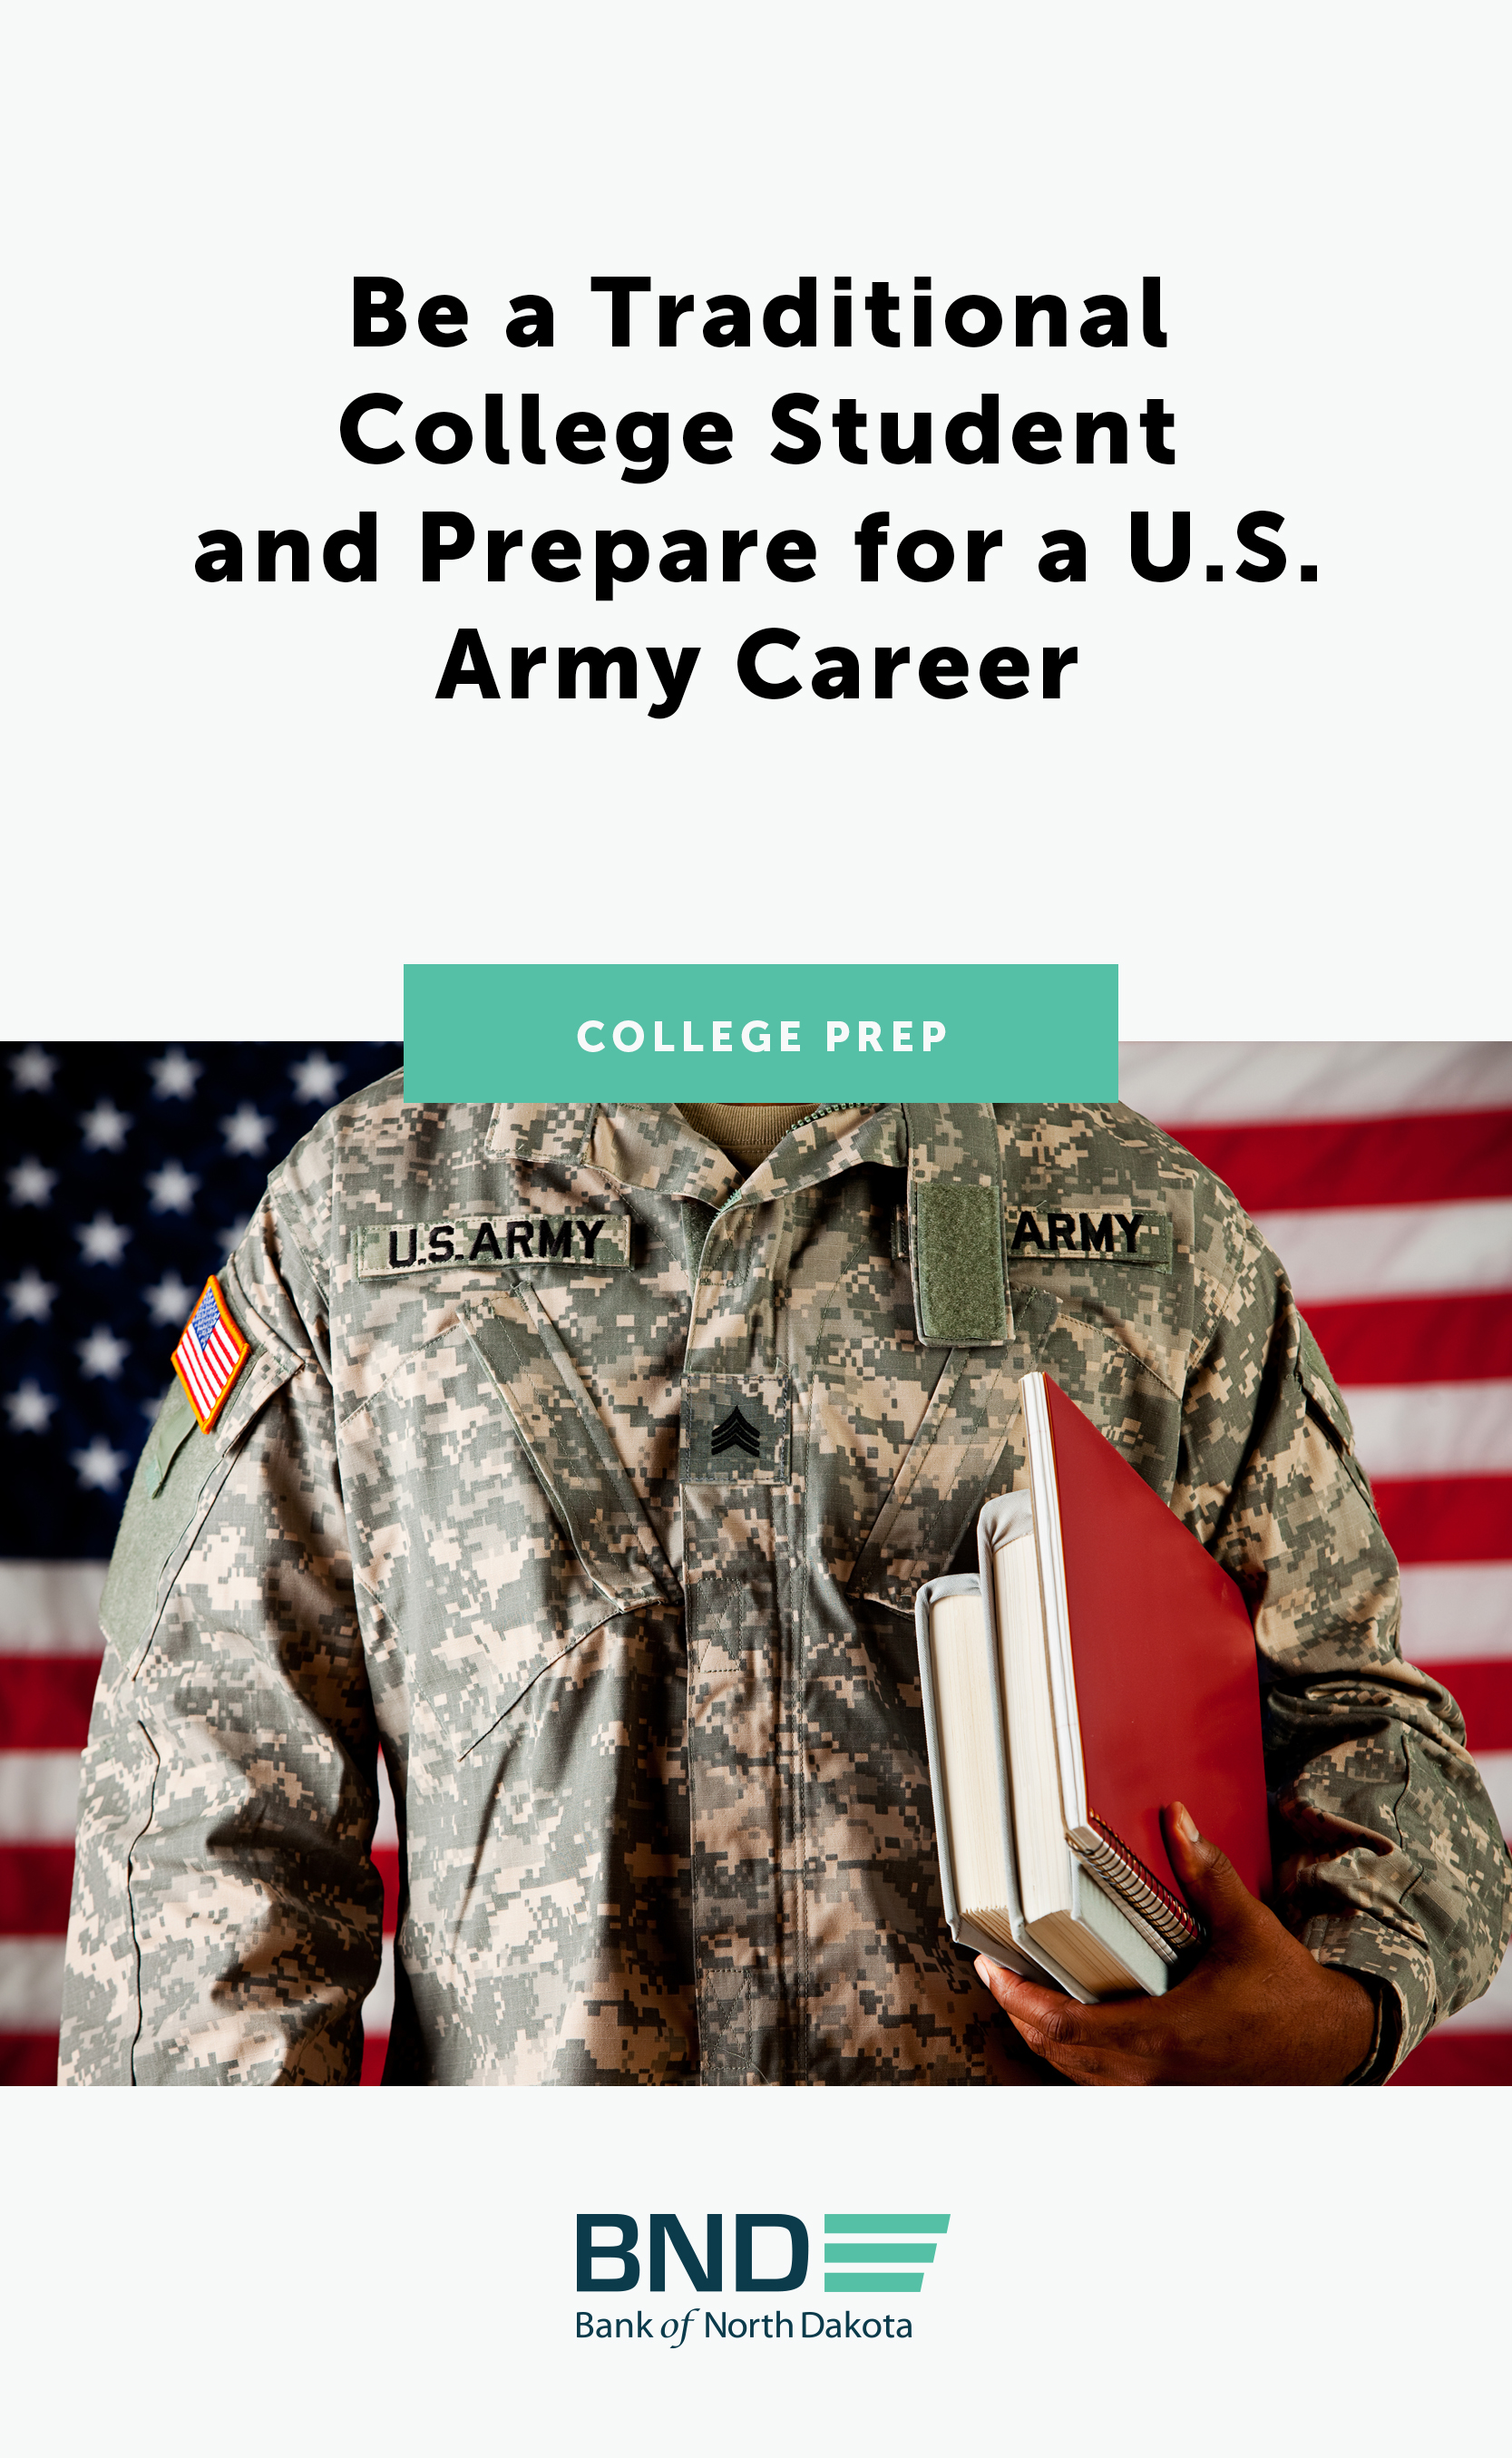 Be a Traditional College Student and Prepare for a U.S. Army Career ...